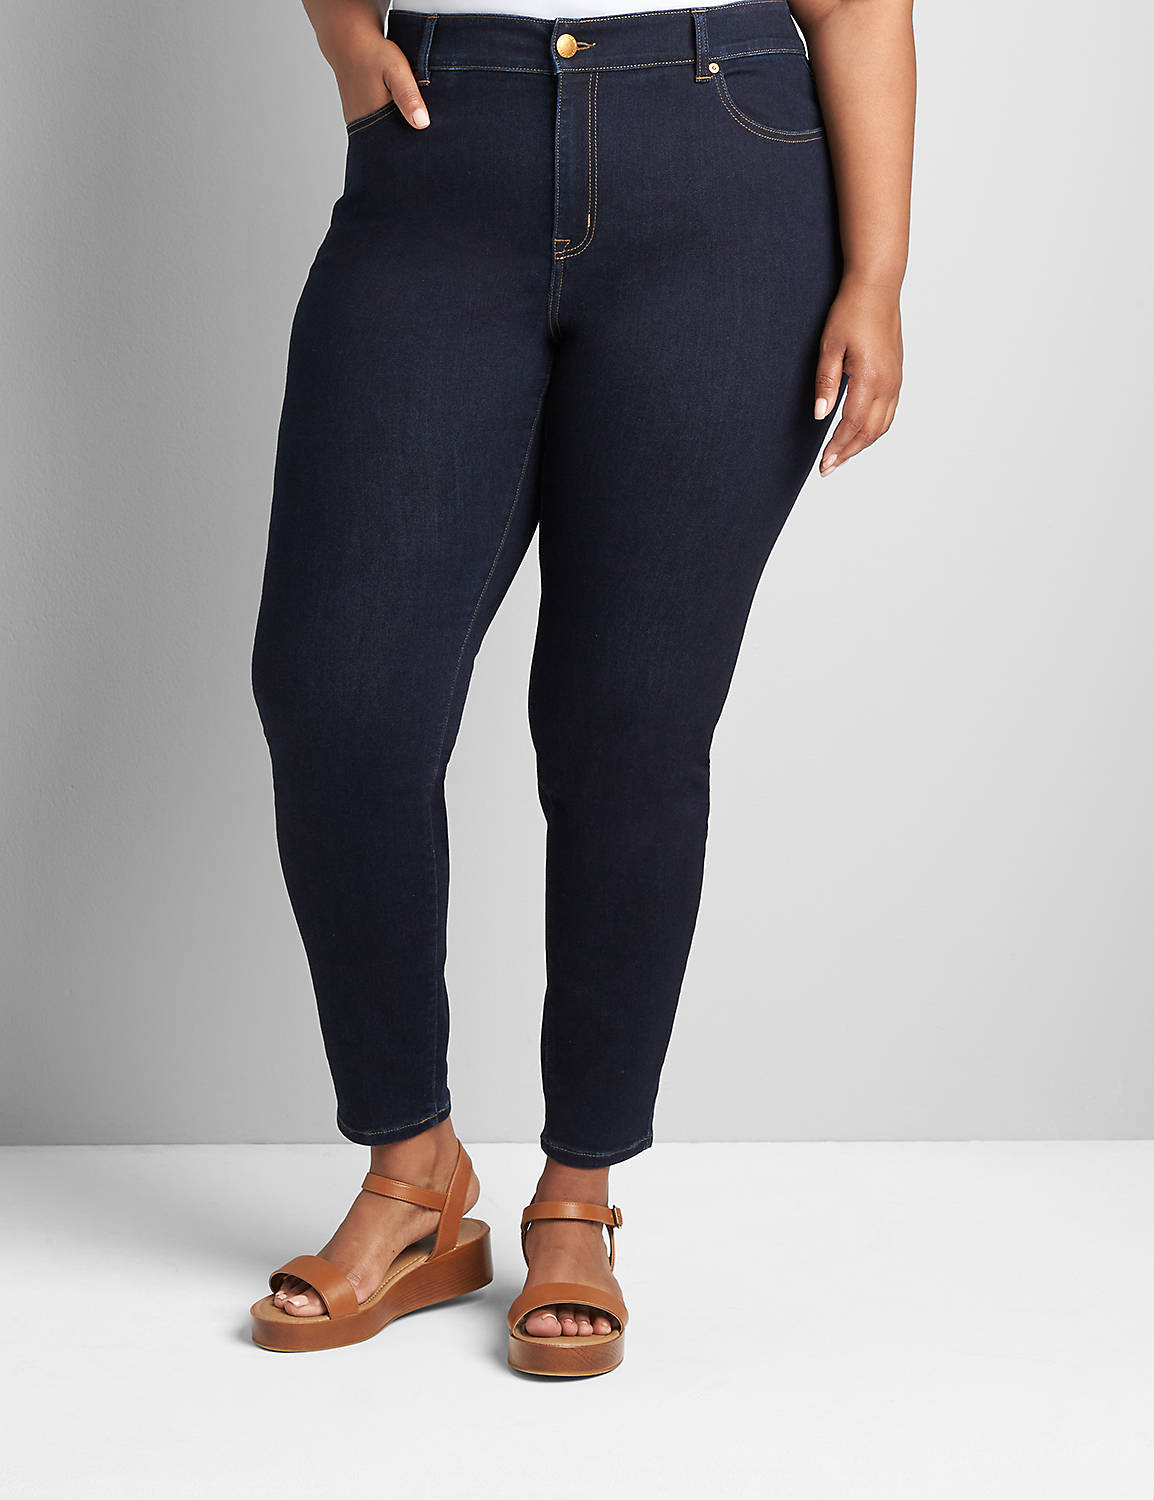 Curvy Fit High-Rise Skinny Jean- Dark Wash Product Image 1